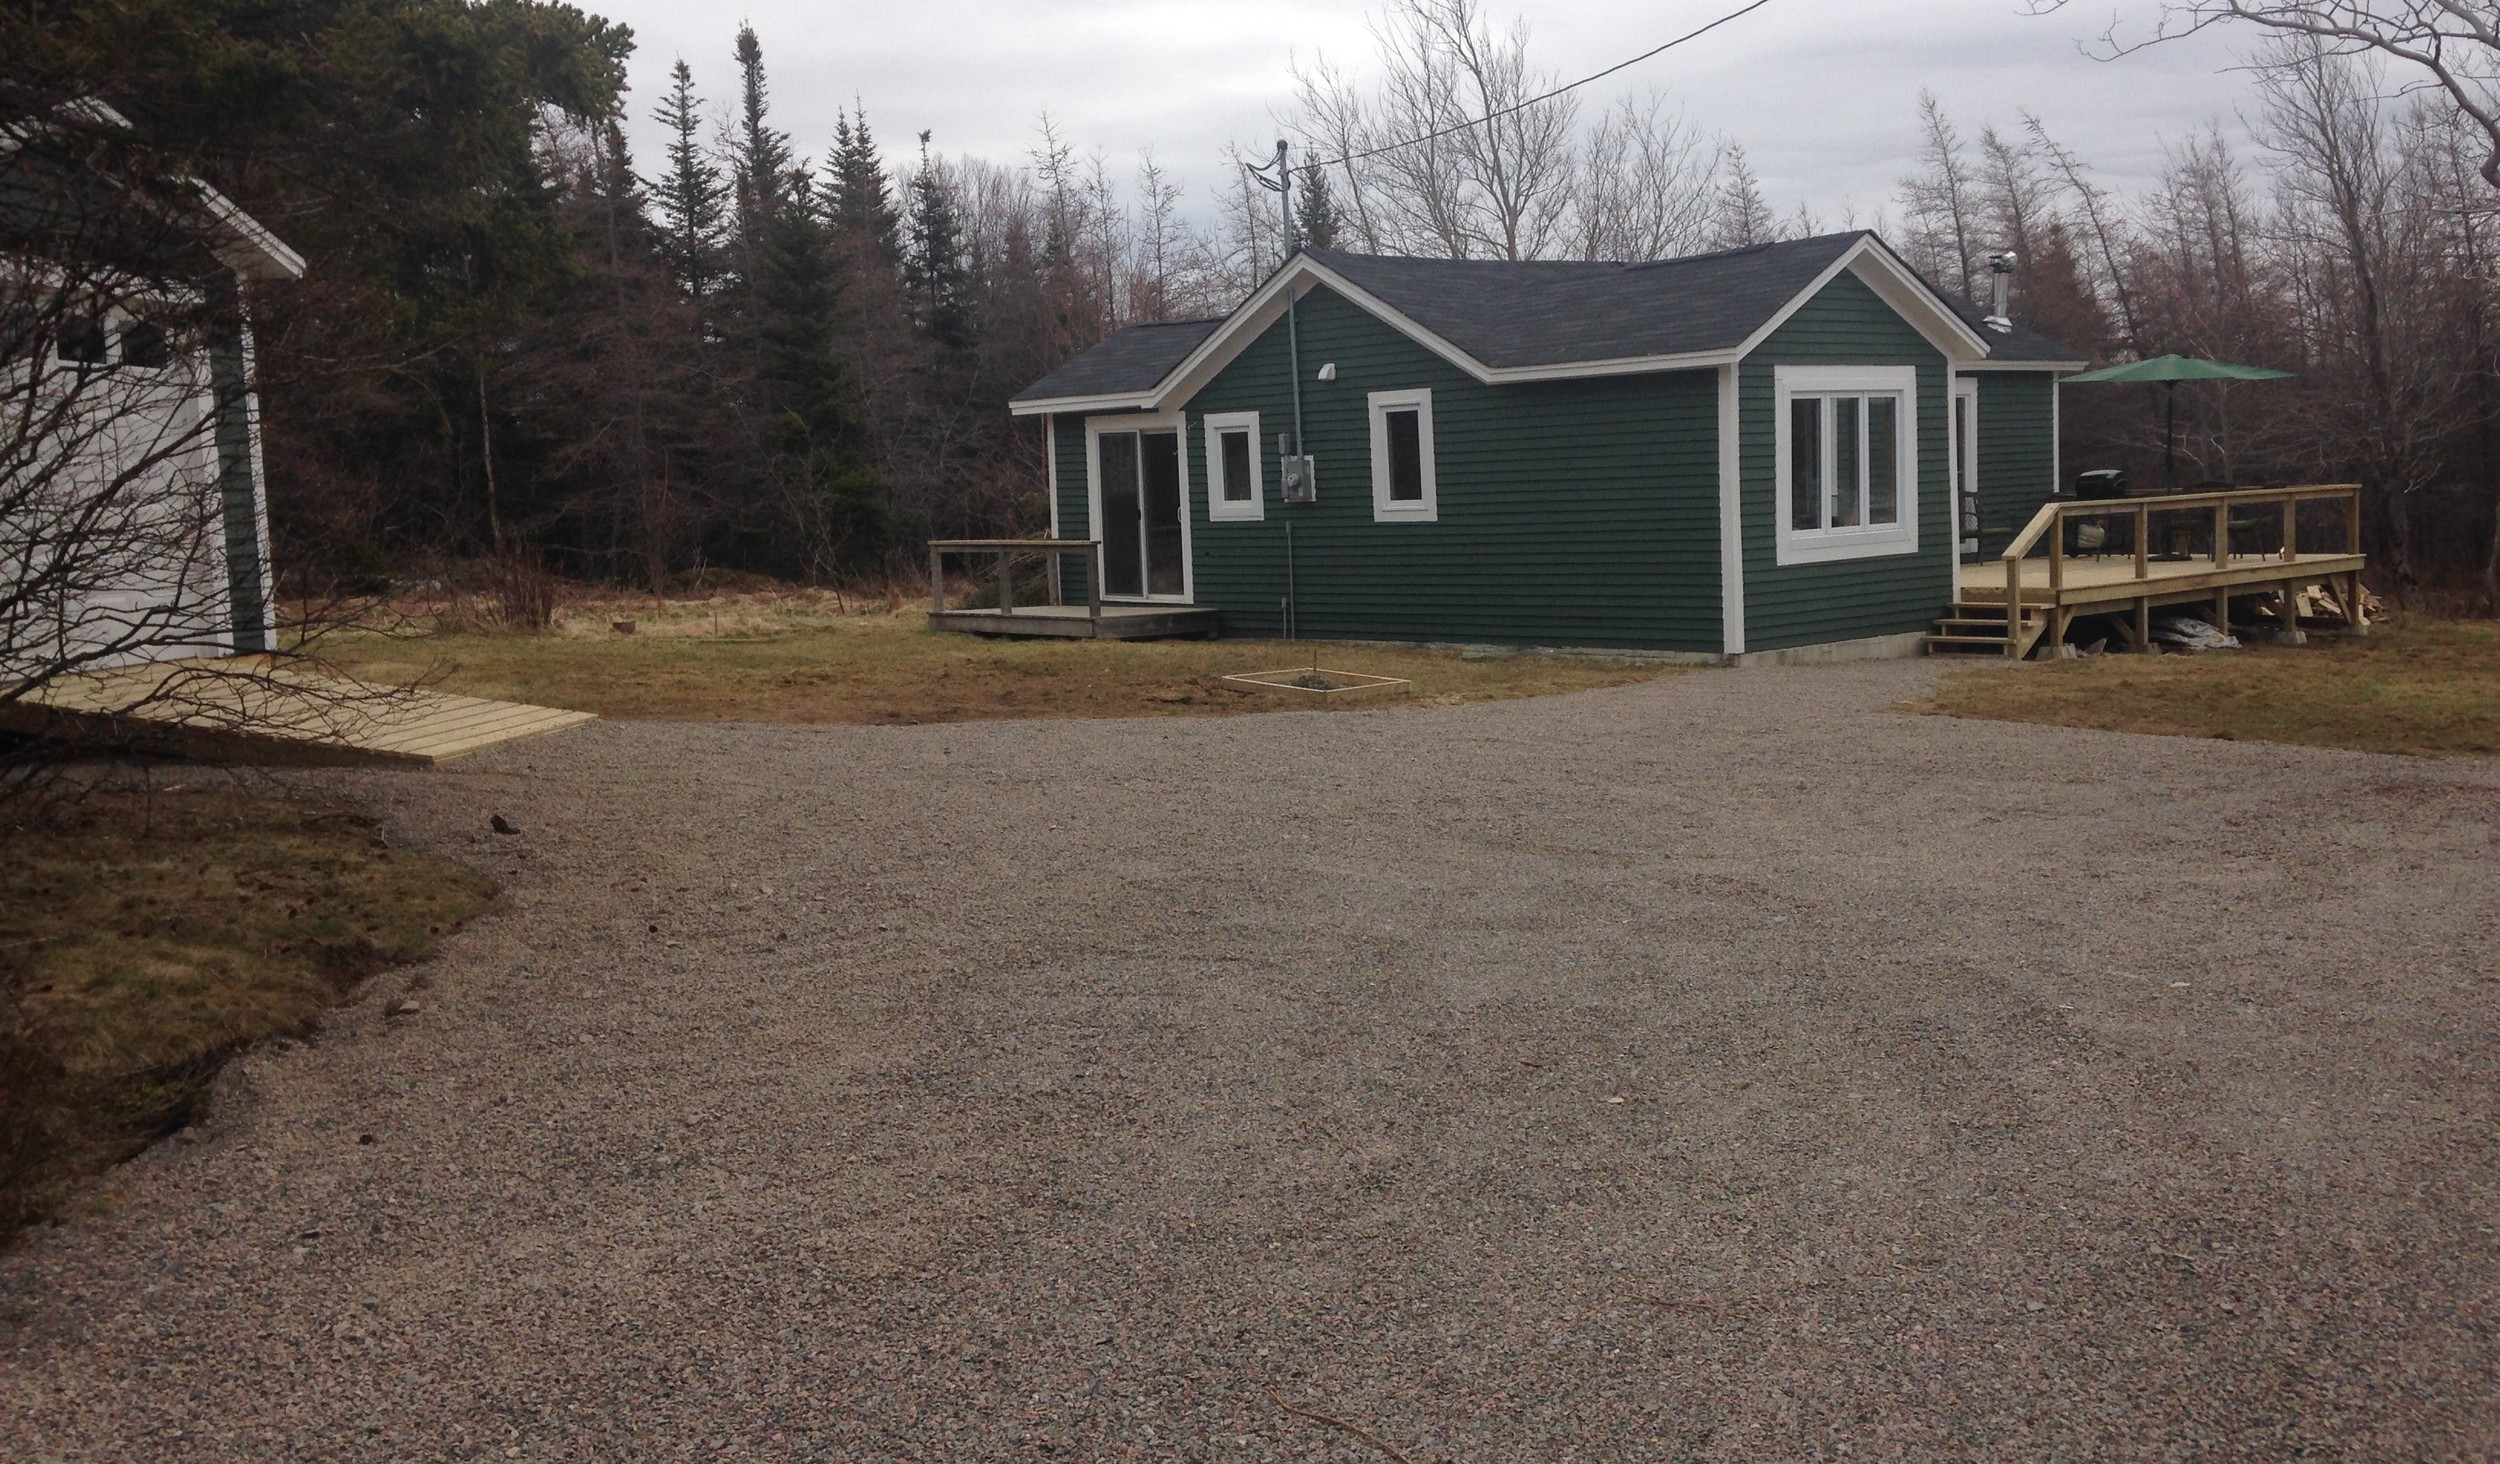 Newly graded driveway and road gravel leading to cabin and new shed